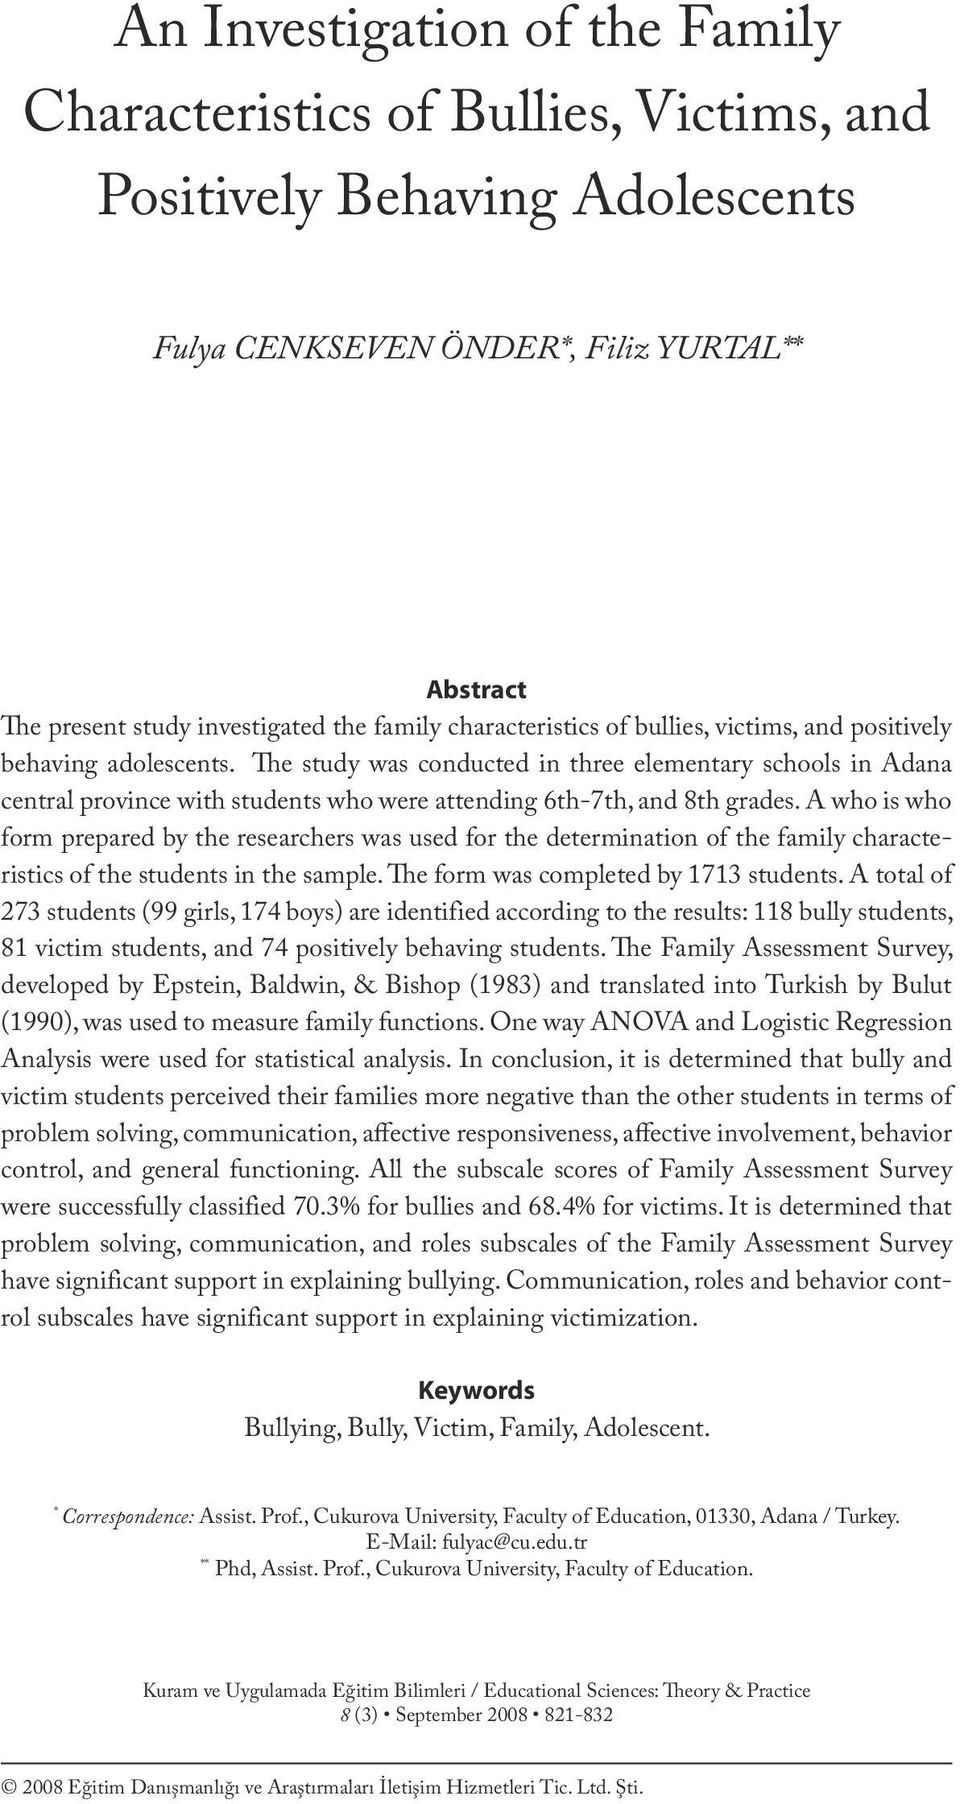 family characteristics of bullies, victims, and positively behaving adolescents.